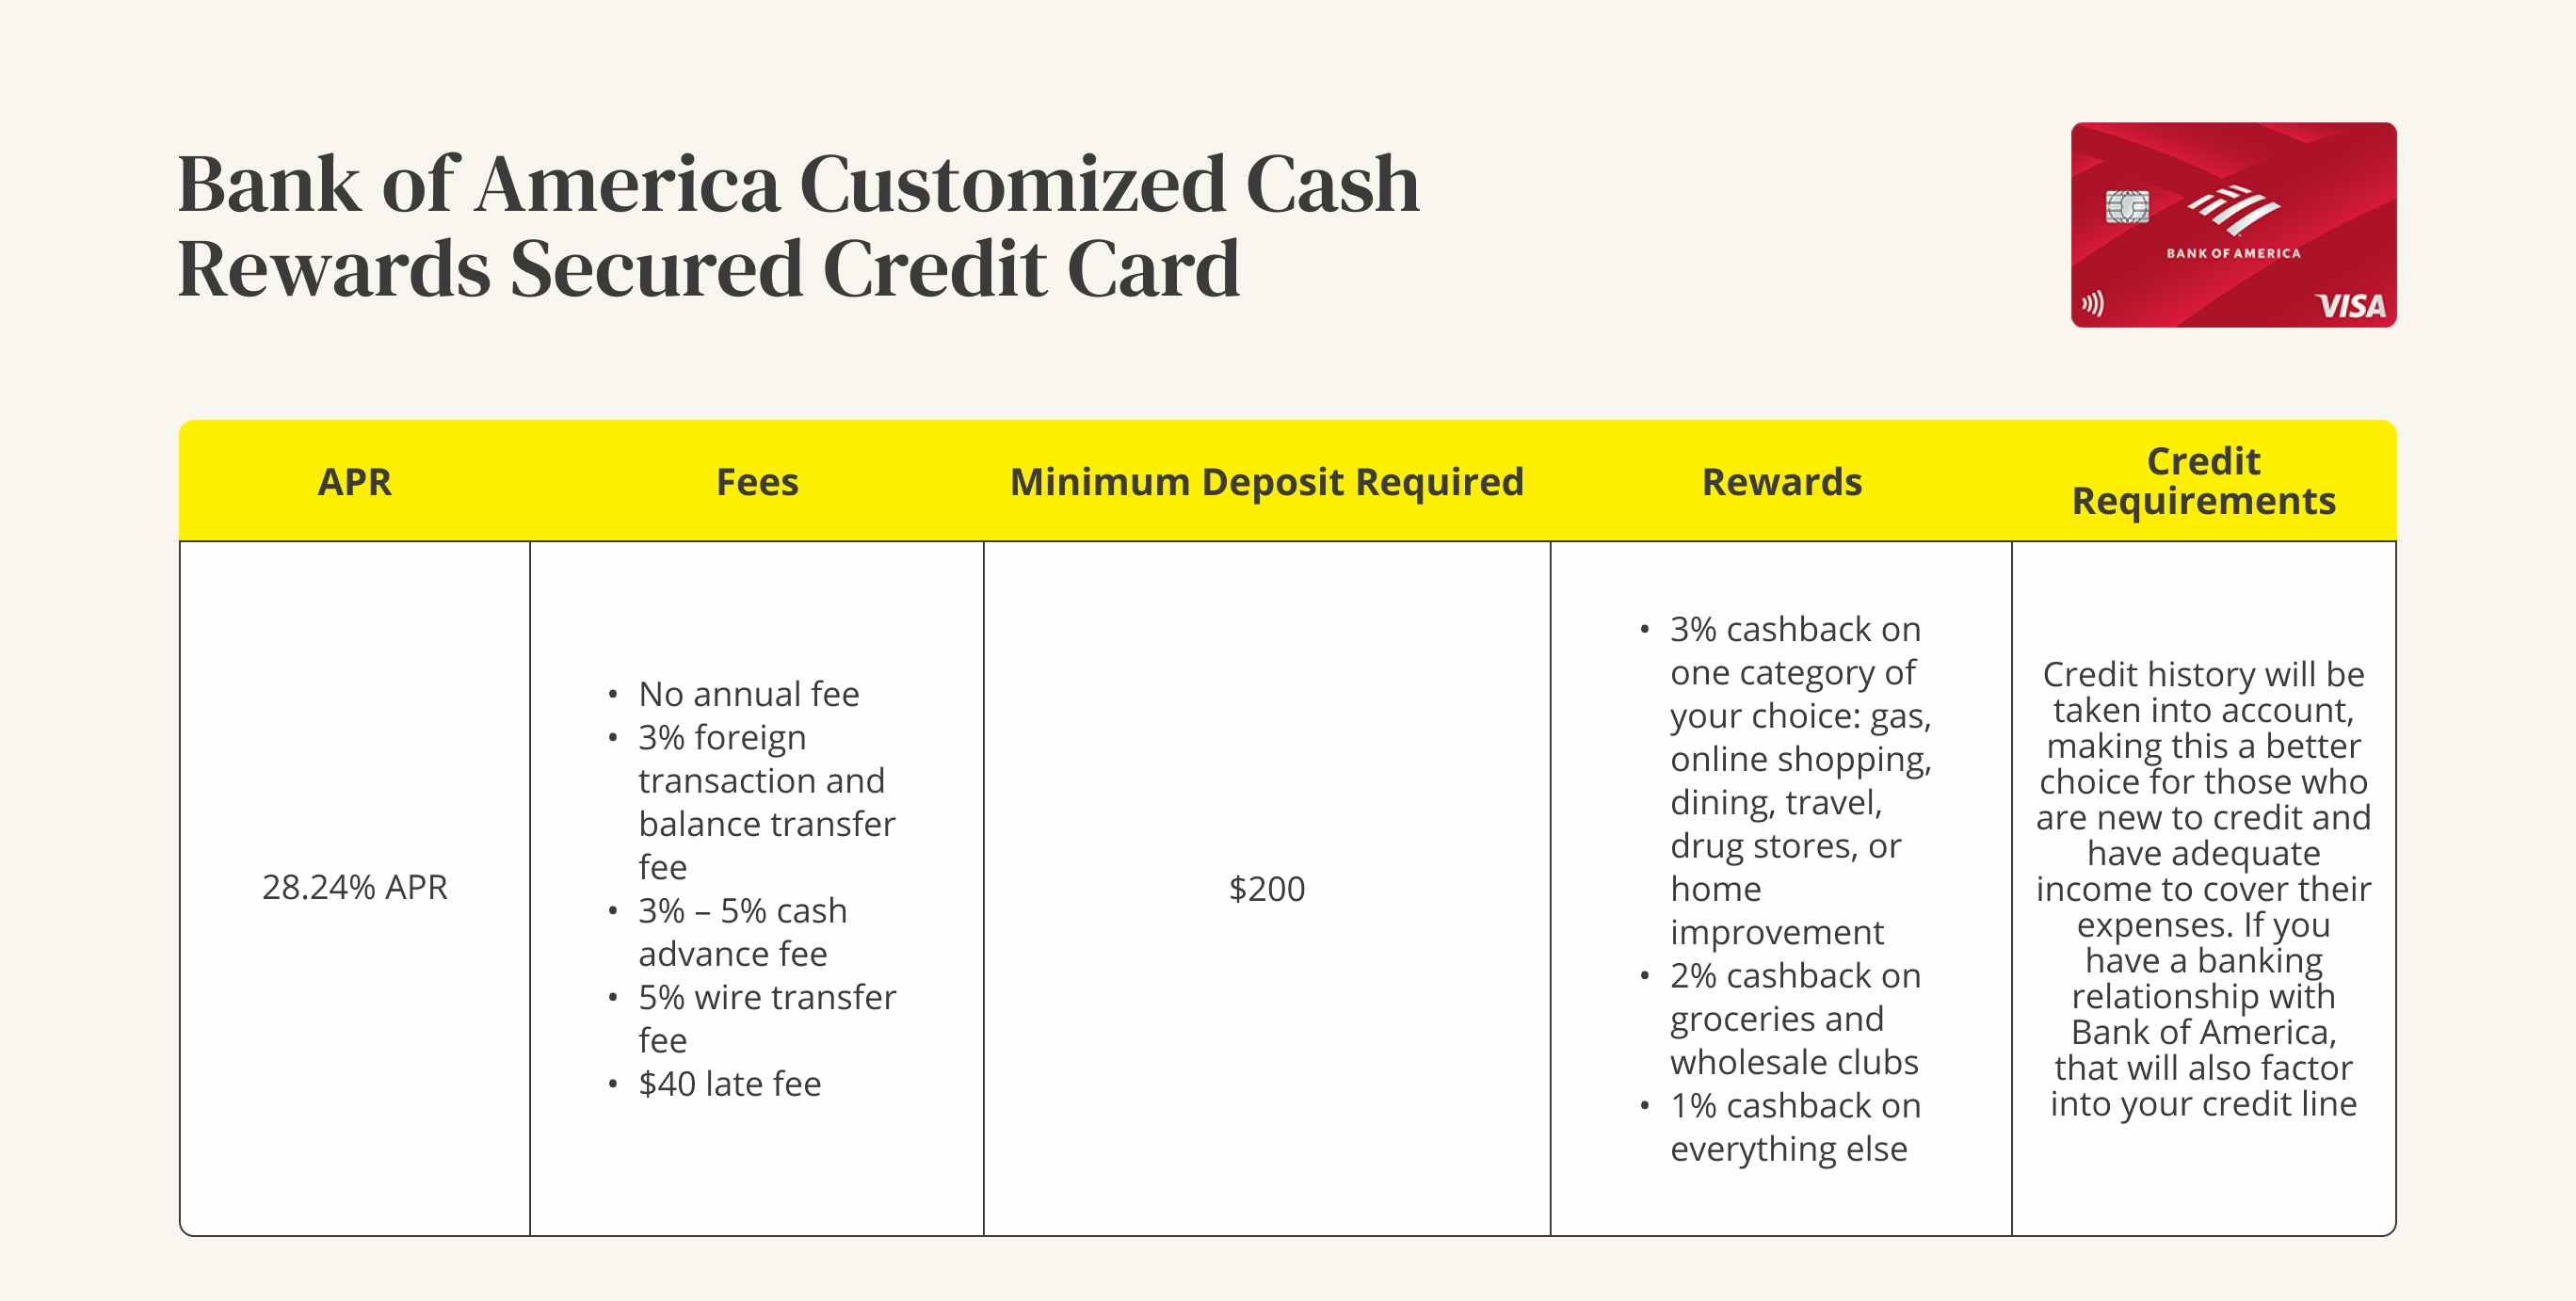 A graphic showing the APR, fees, minimum deposit, rewards, and credit requirements for a Bank of America Customized Cash Rewards ...